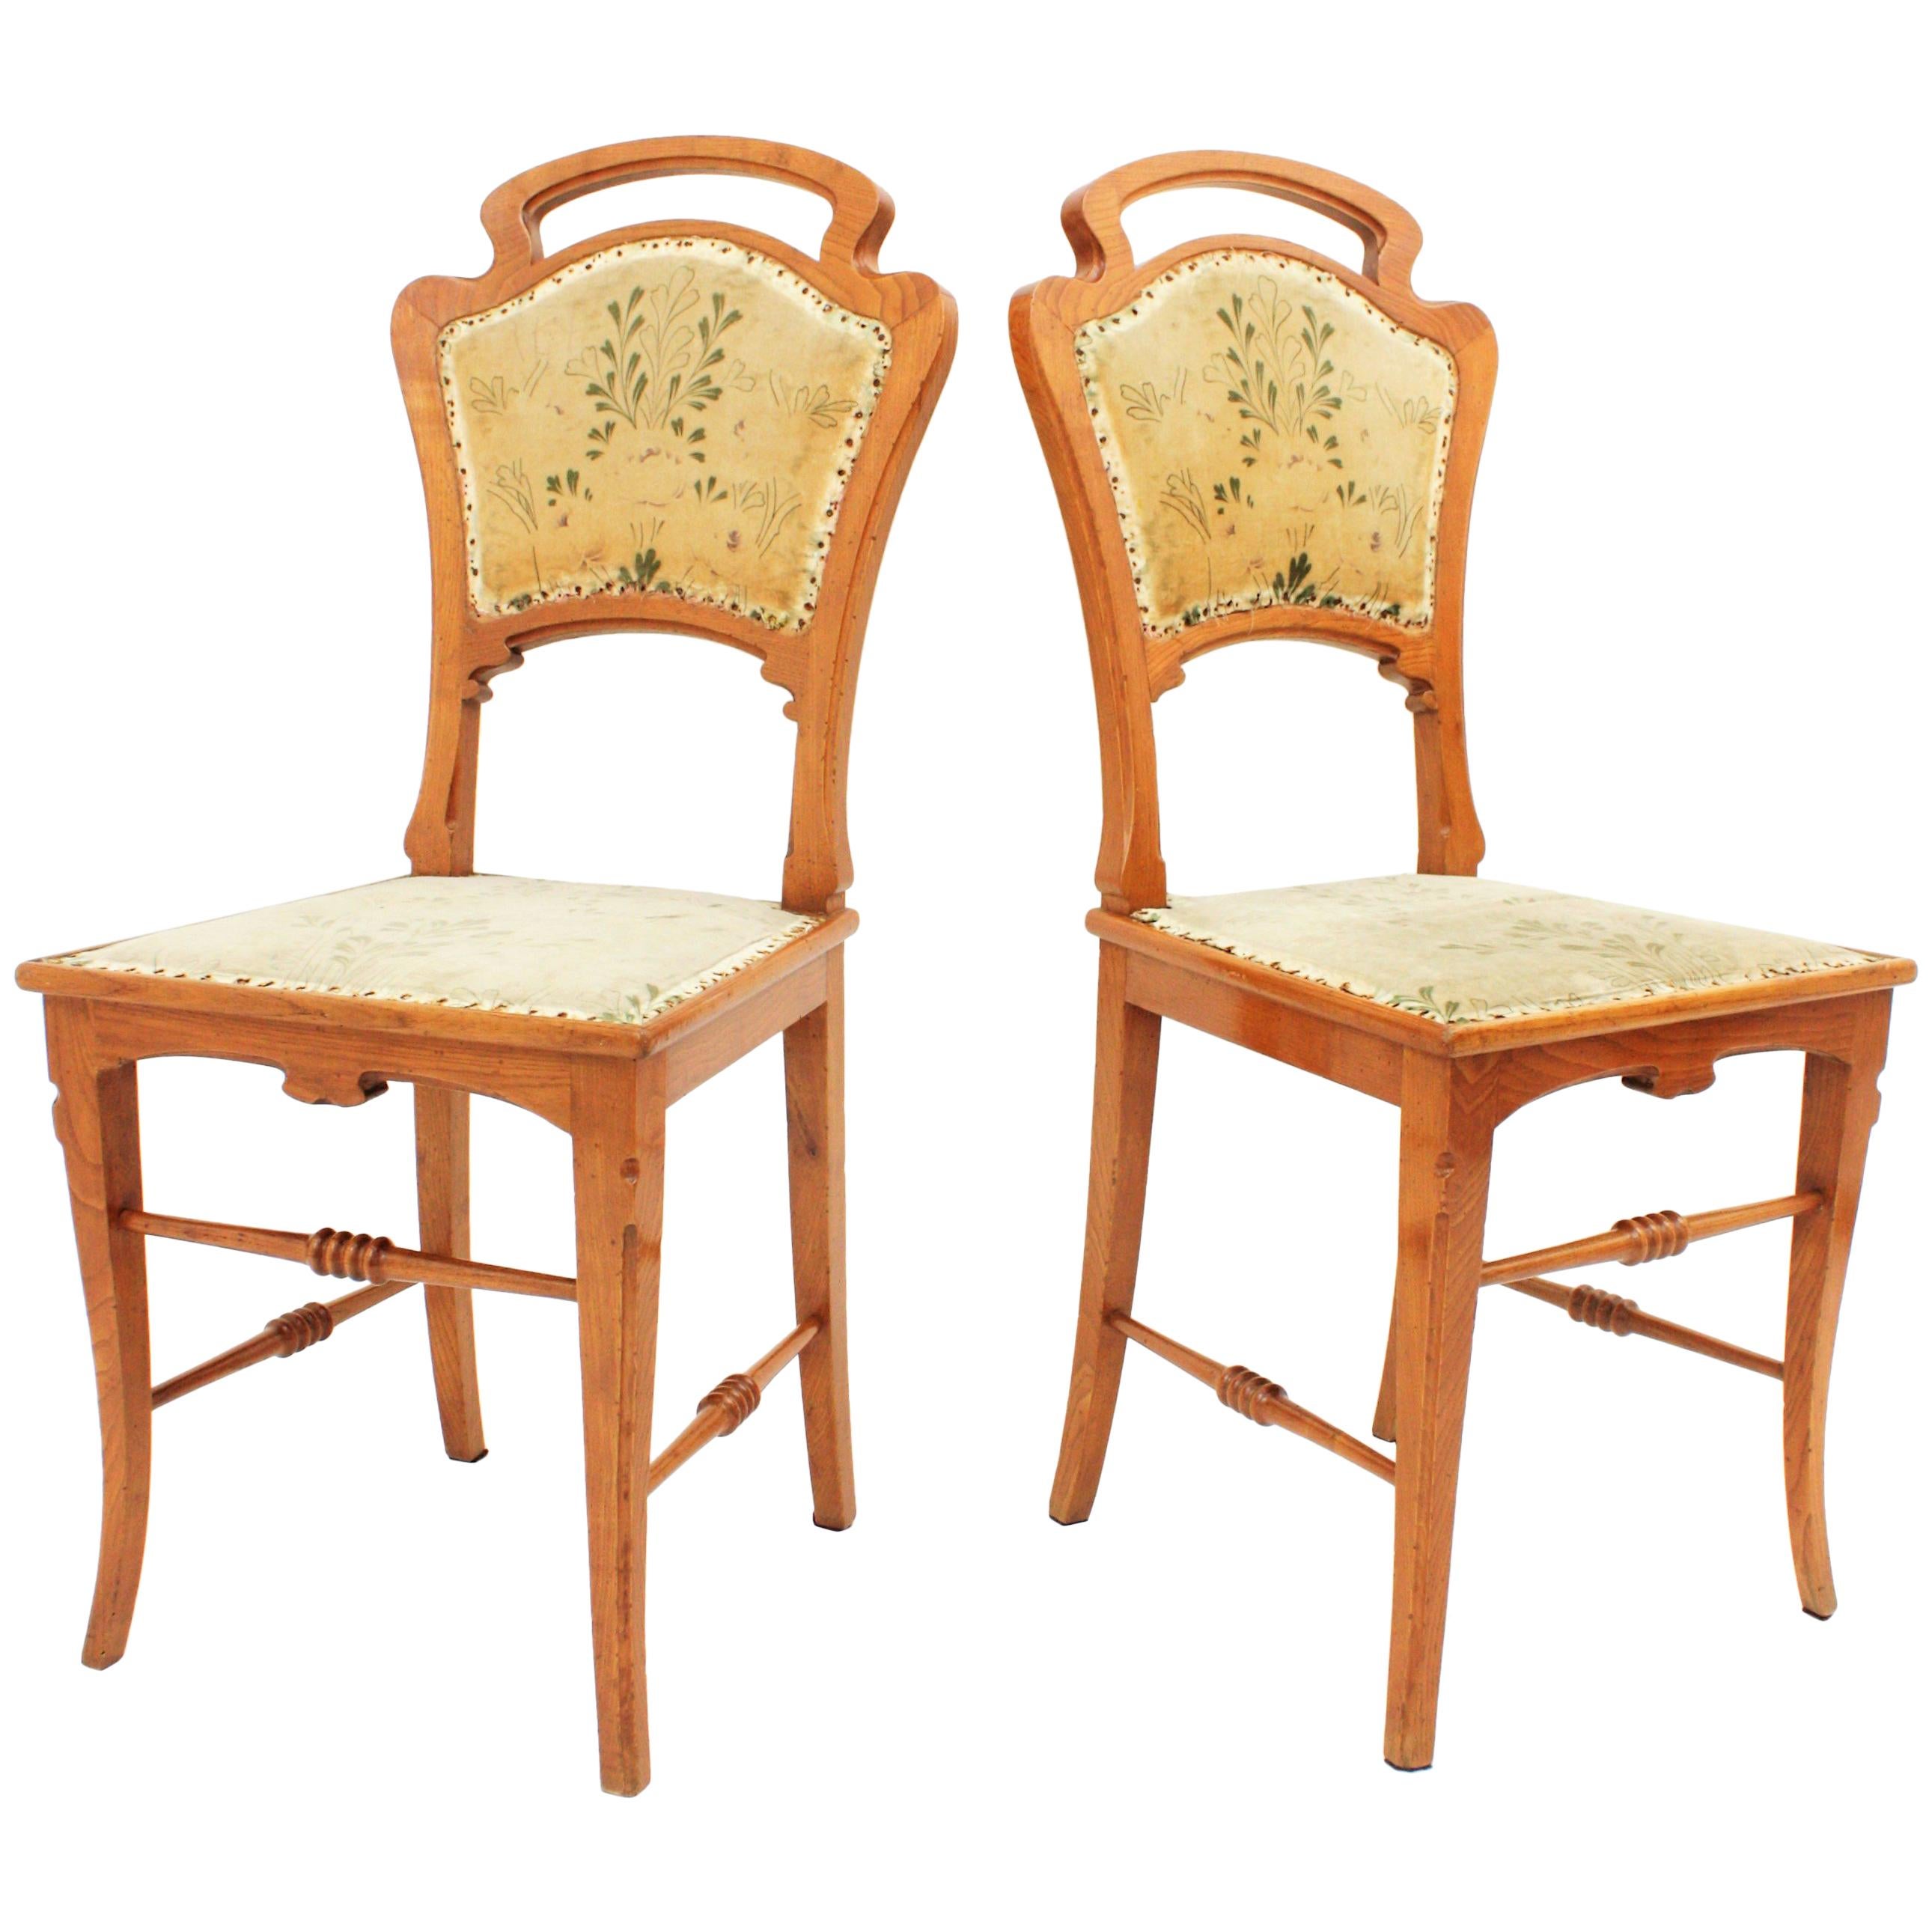 Spanish Art Nouveau Antoni Gaudi Style Pair of Carved Ashwood Side Chairs For Sale